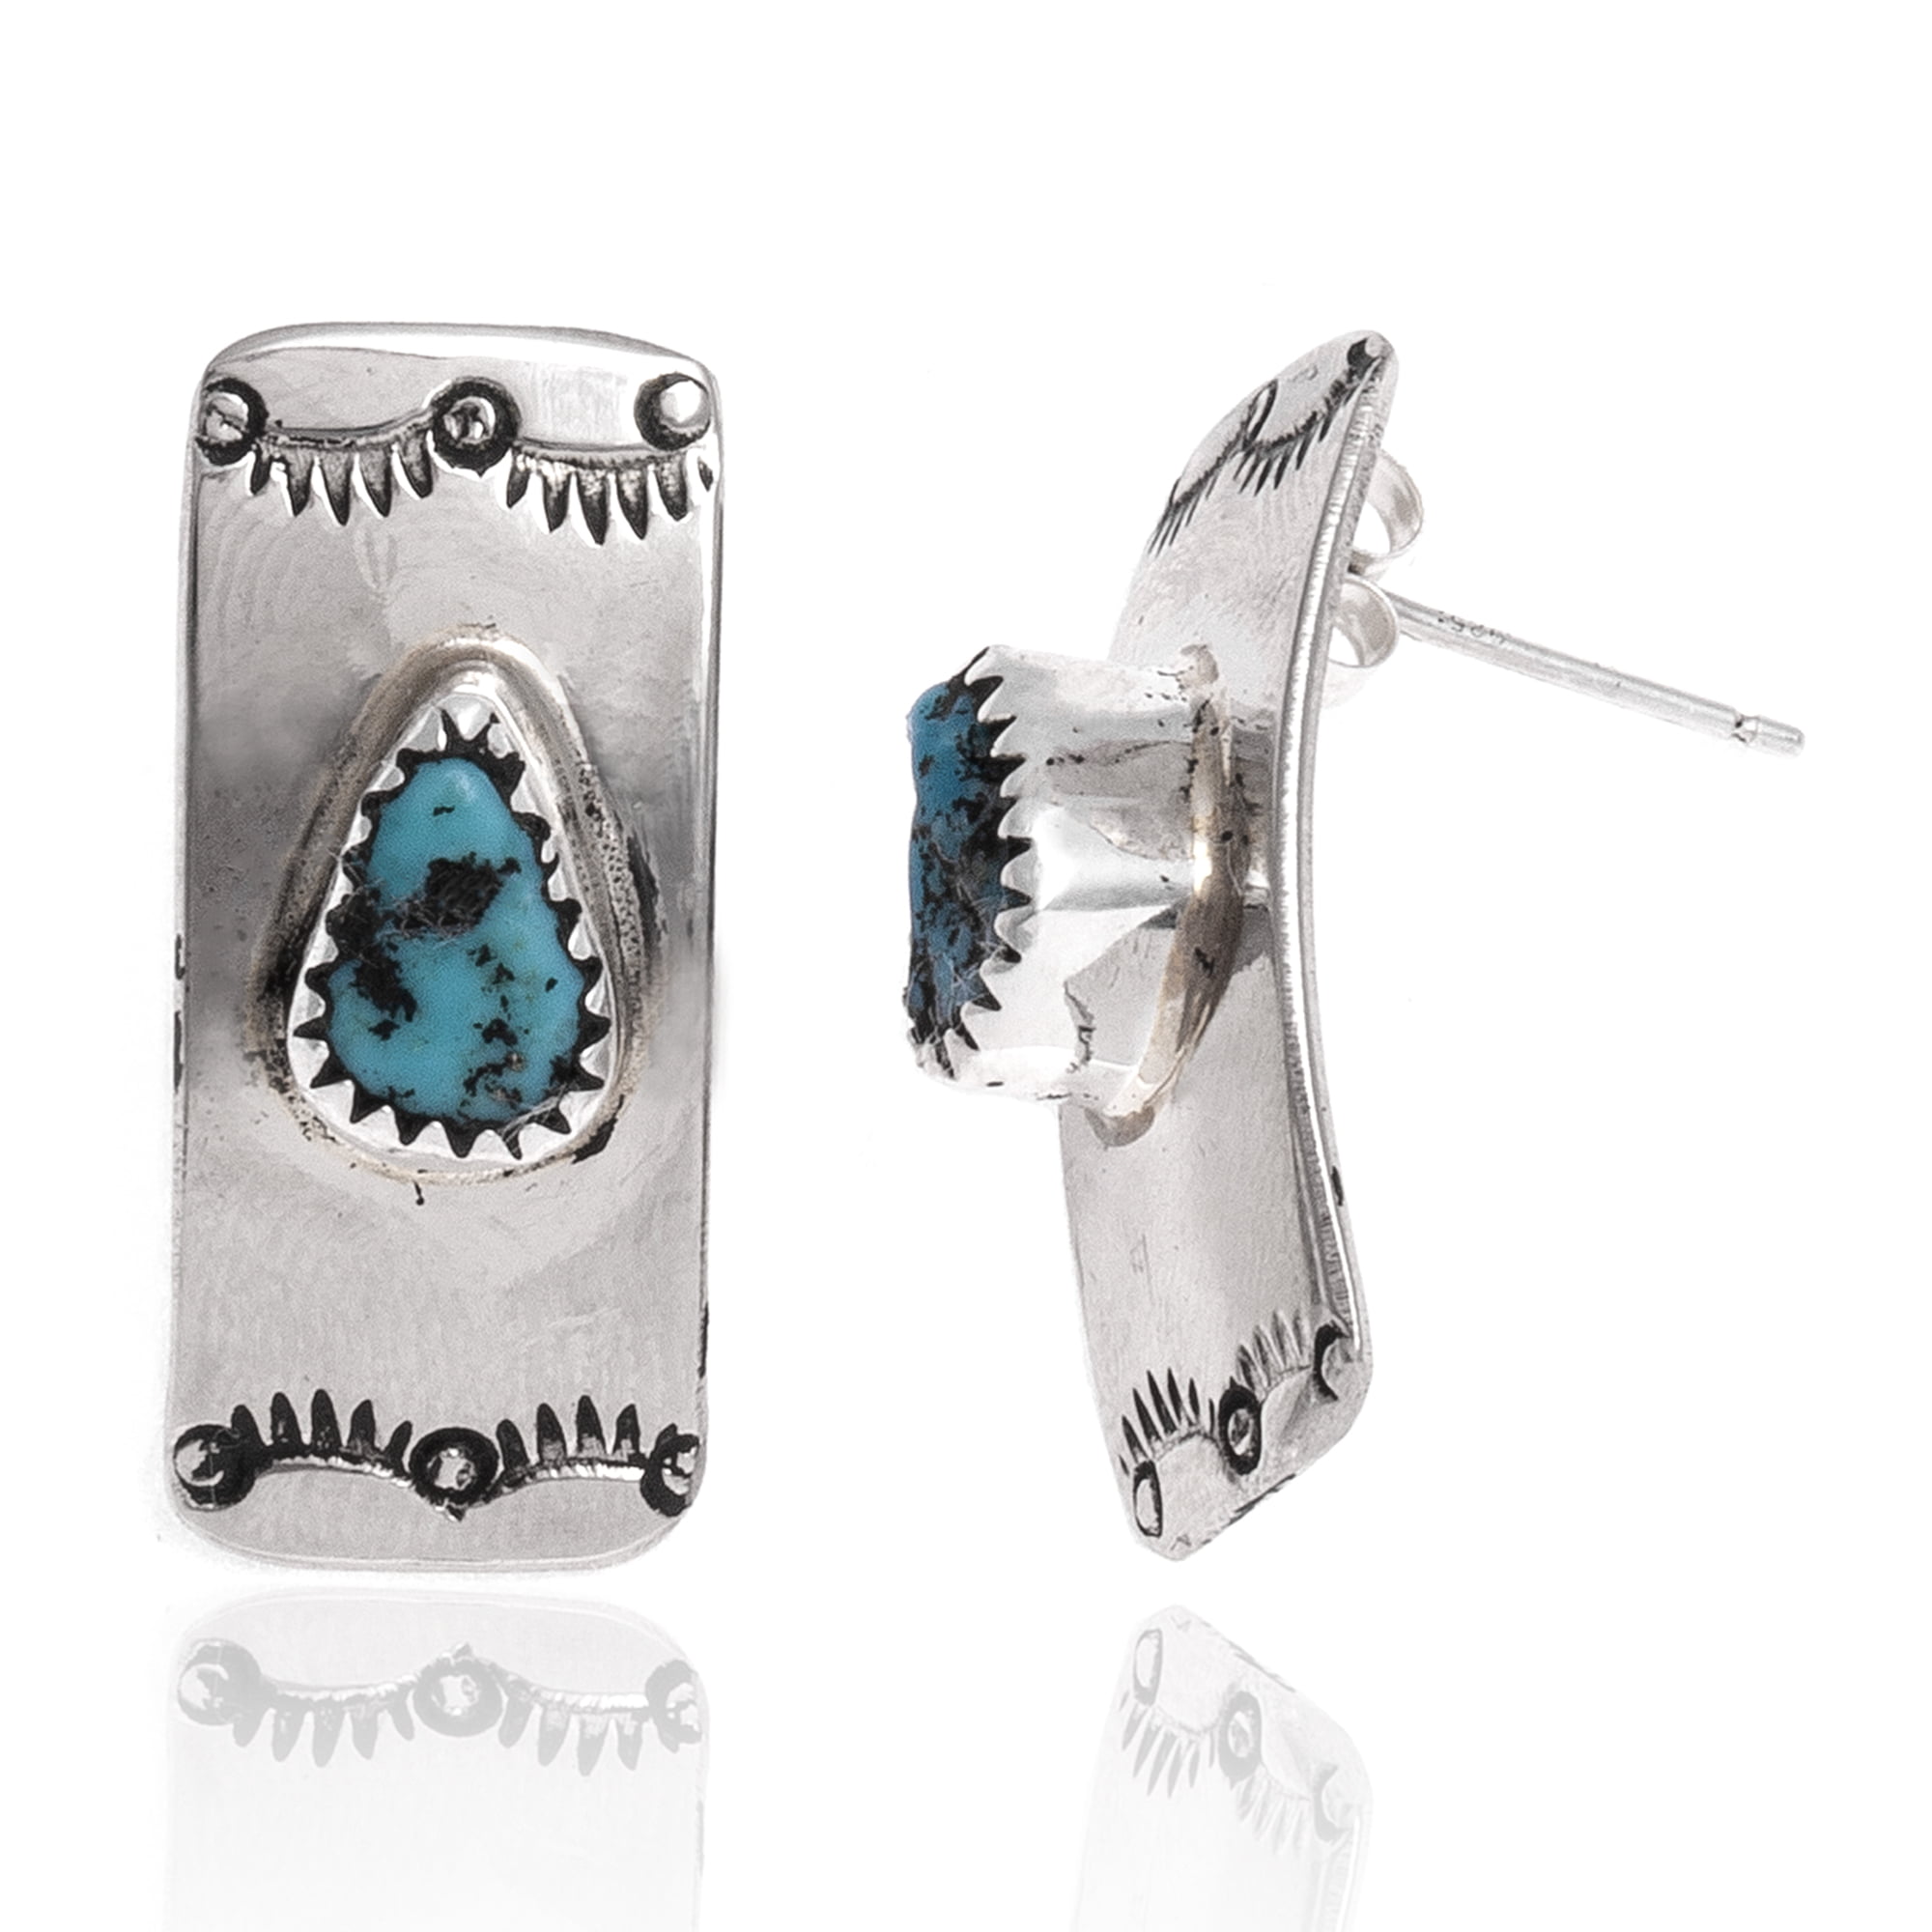 Stud Earrings Handmade Silver Posts Natural Rough Stone .925 Silver Jewelry Accessories Gift Turquoise Earrings